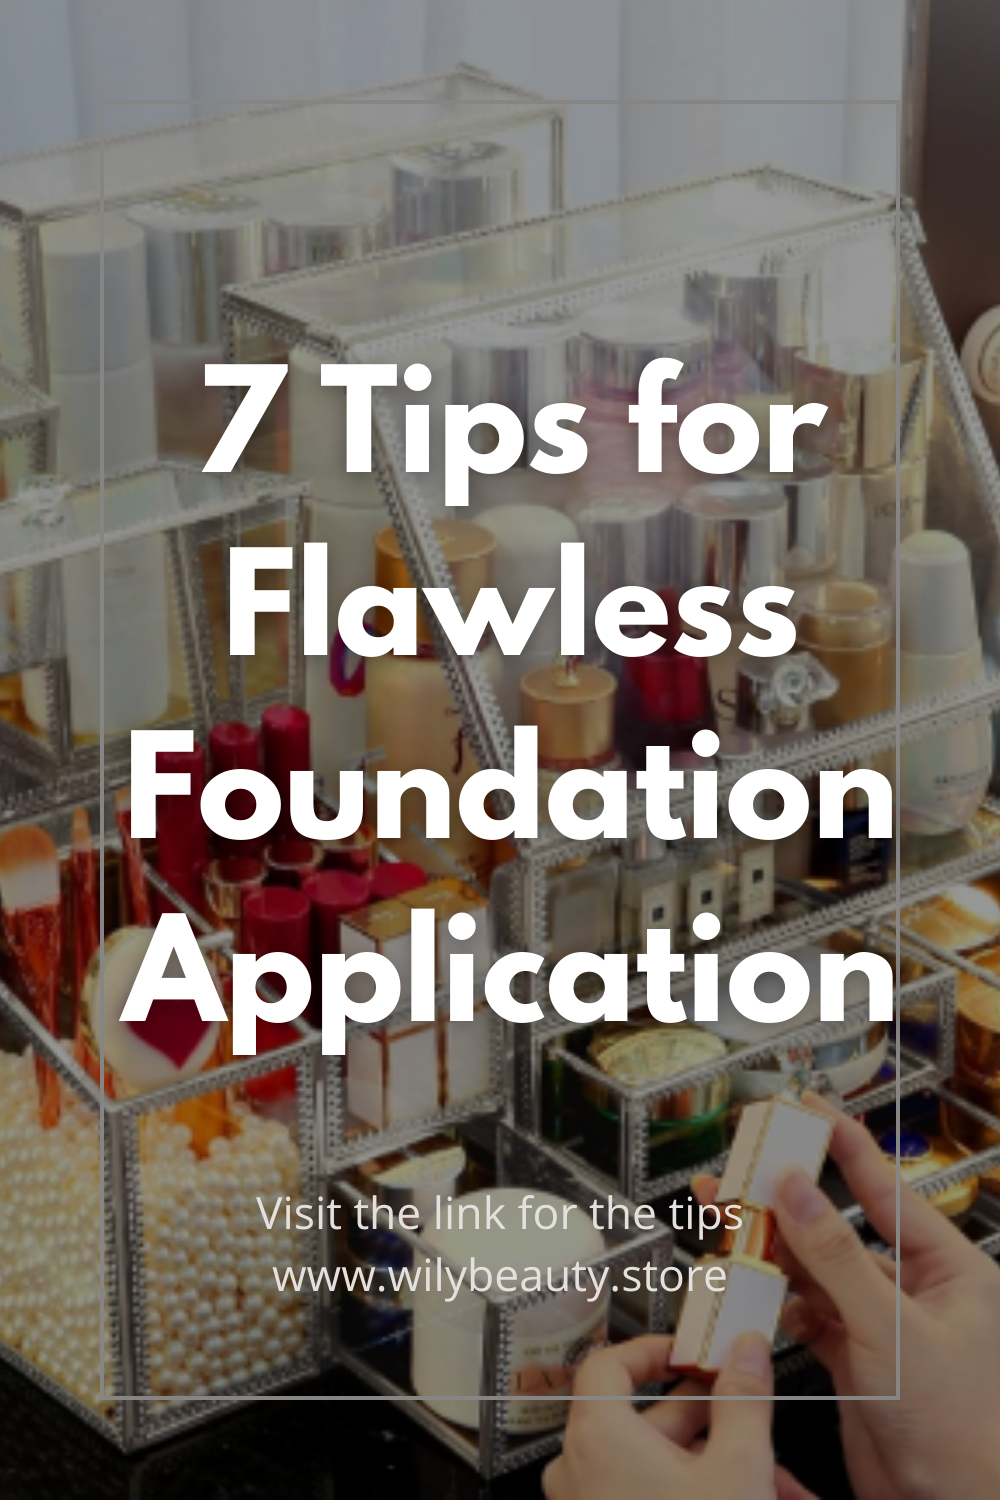 7 Tips for Flawless Foundation Application